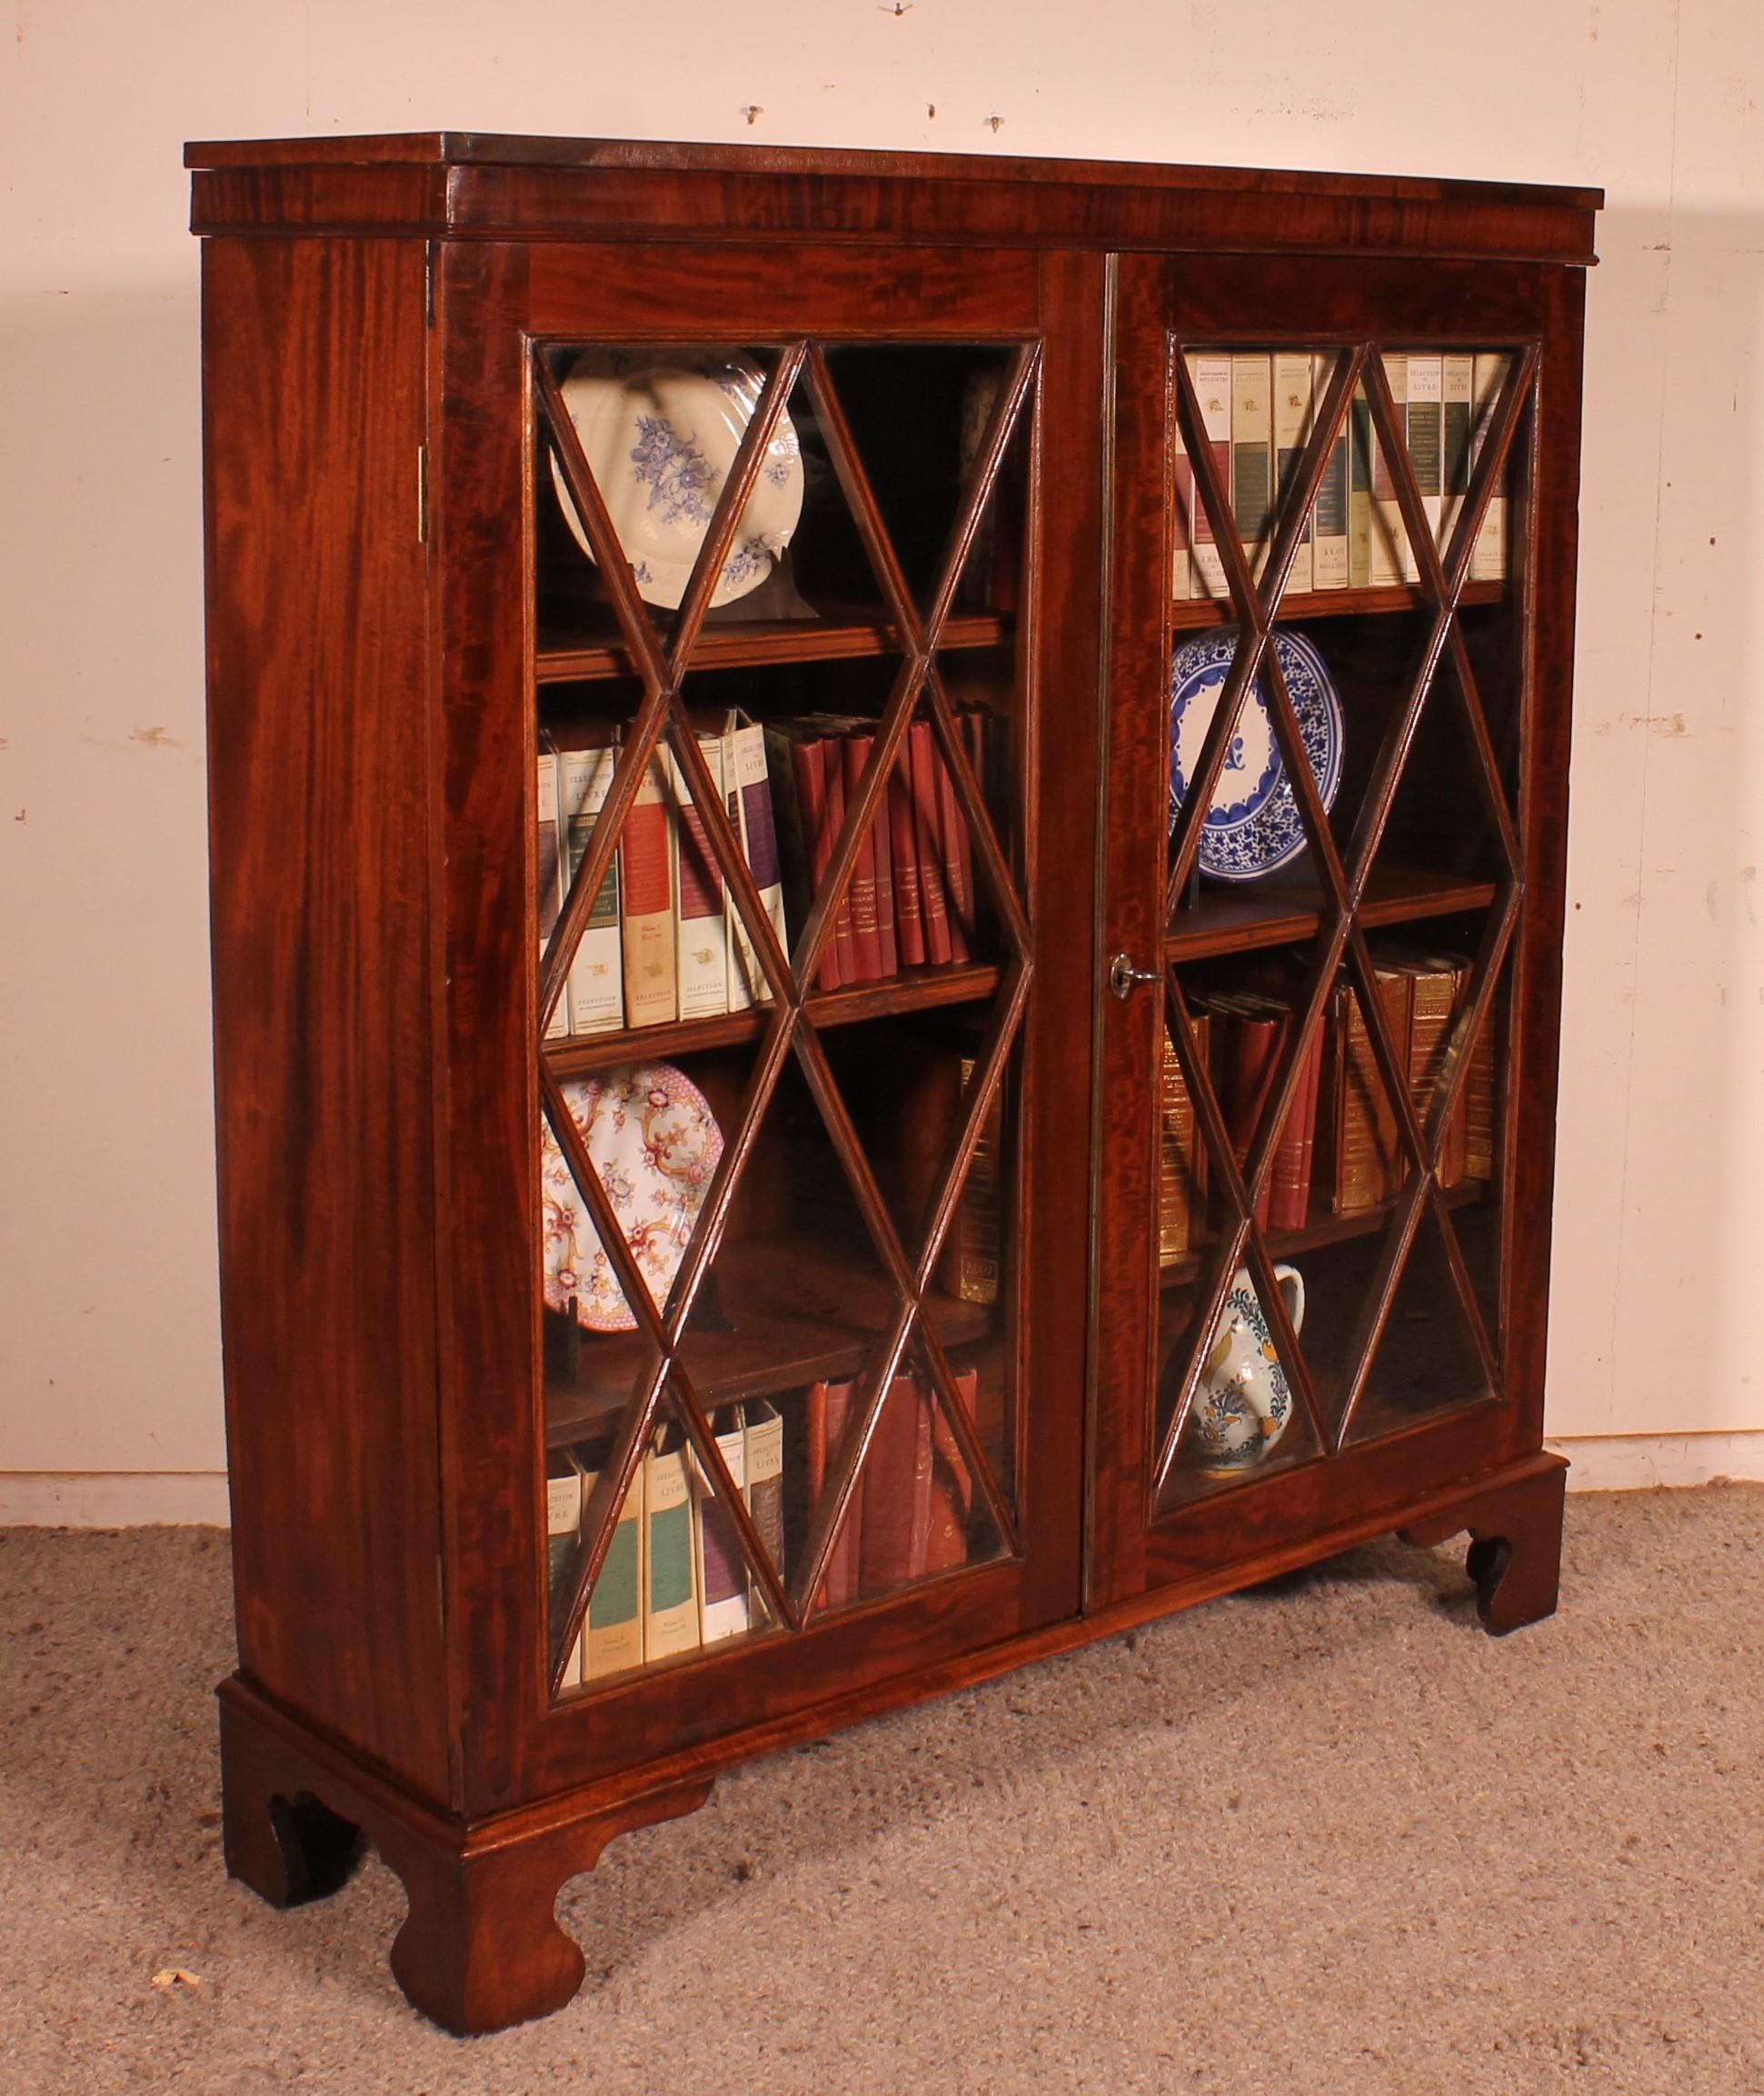 Mahogany Glazed Bookcase From The 19th Century - England For Sale 1